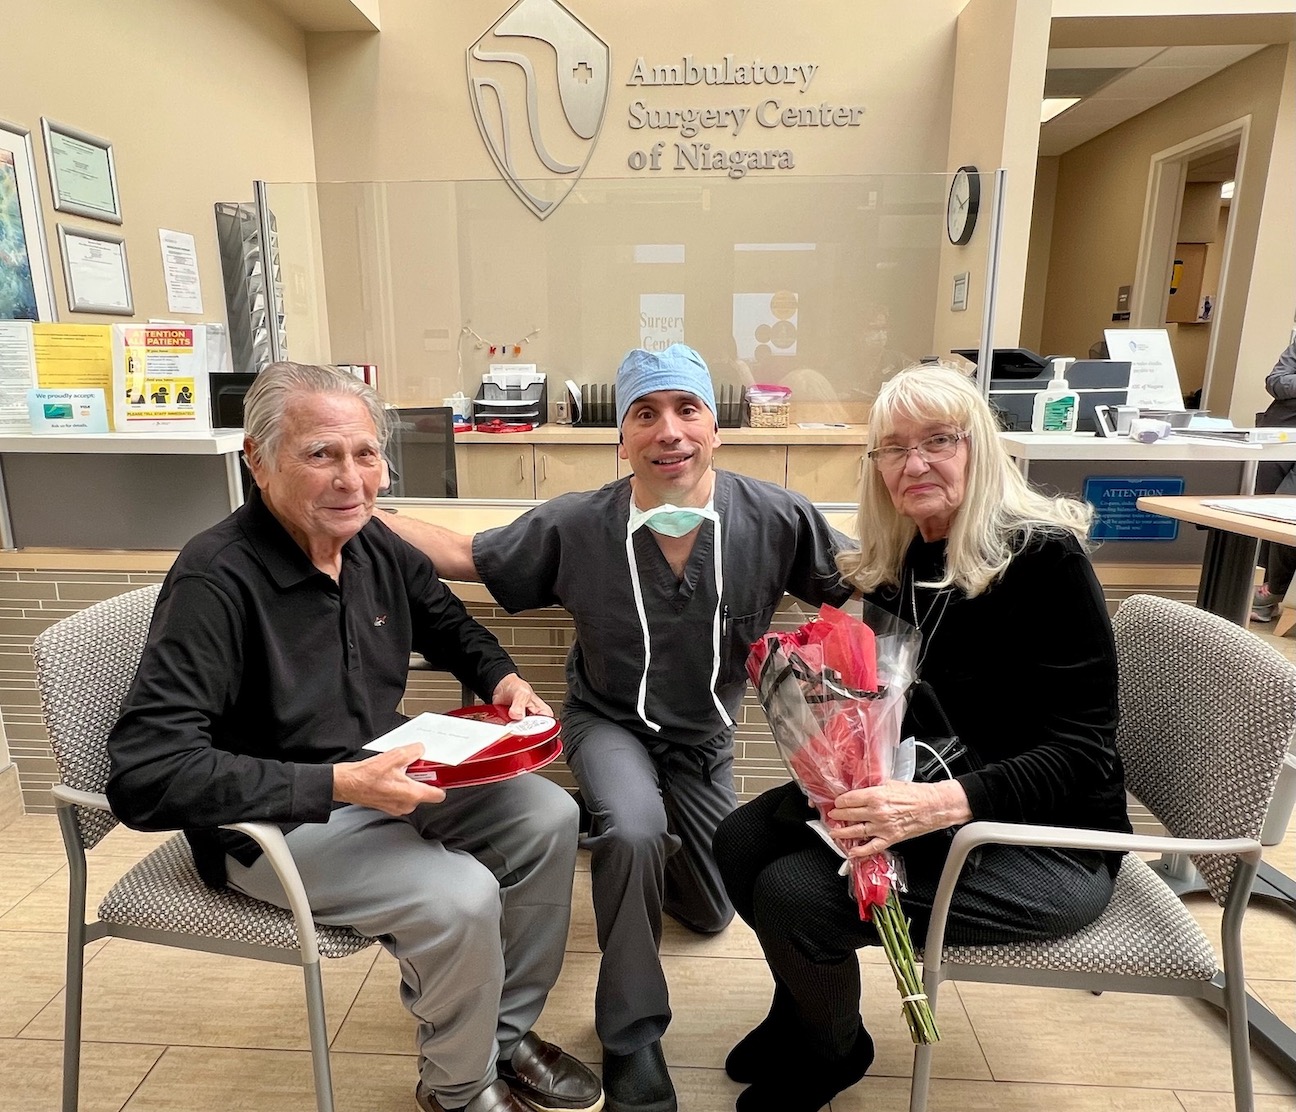 Dr. Michael J. Endl presents Valentine's Day gifts to Sam and Diane Sansone, who both had cataract surgery together on the holiday. (Photos courtesy of Fichte, Endl & Elmer Eyecare)